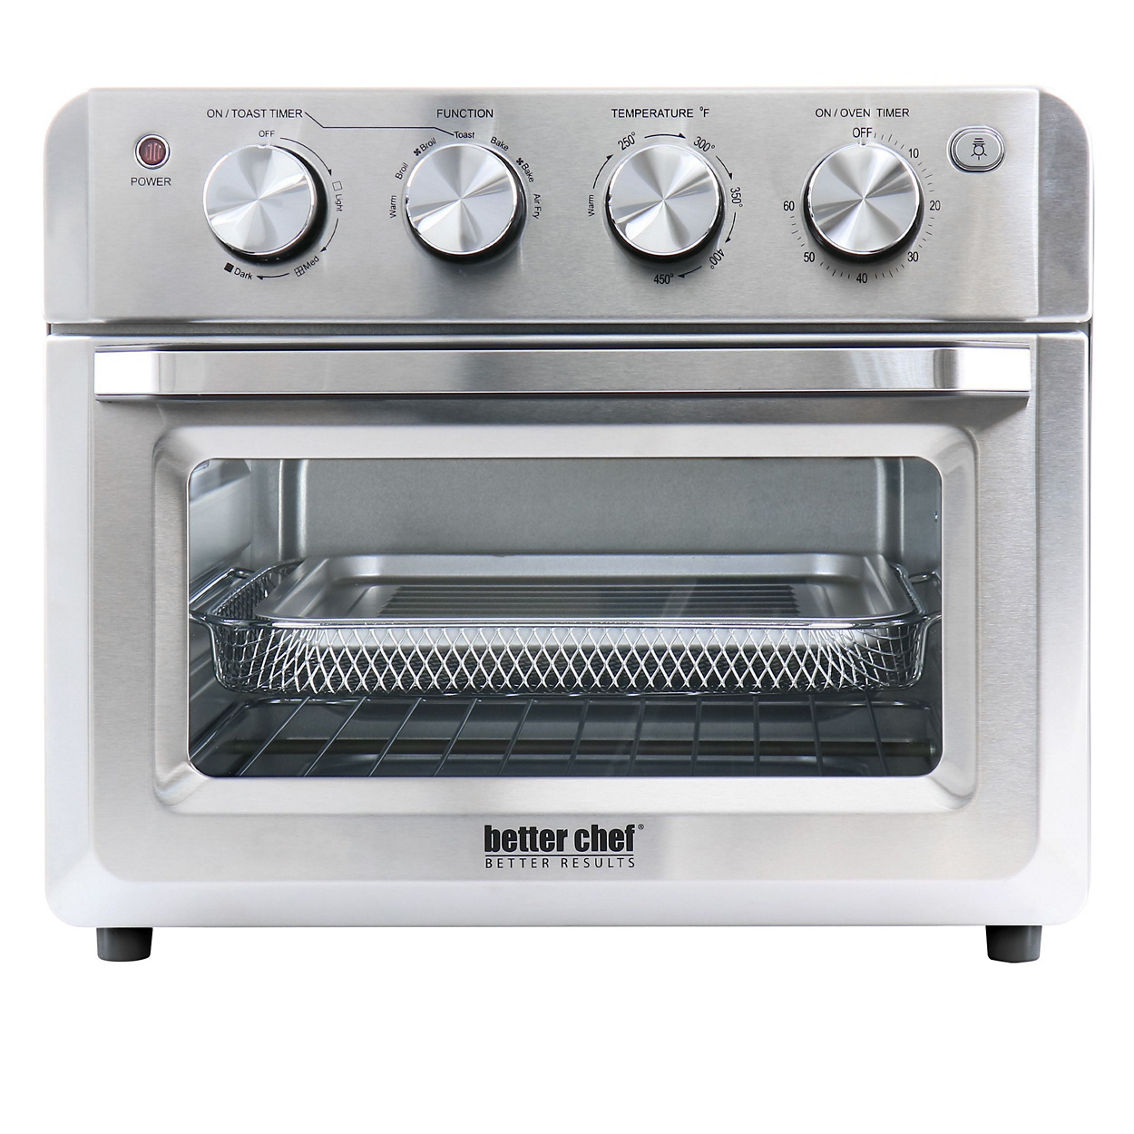 Better Chef Do-It-All 20 Liter Convection Air Fryer Toaster Broiler Oven in Silv - Image 2 of 5